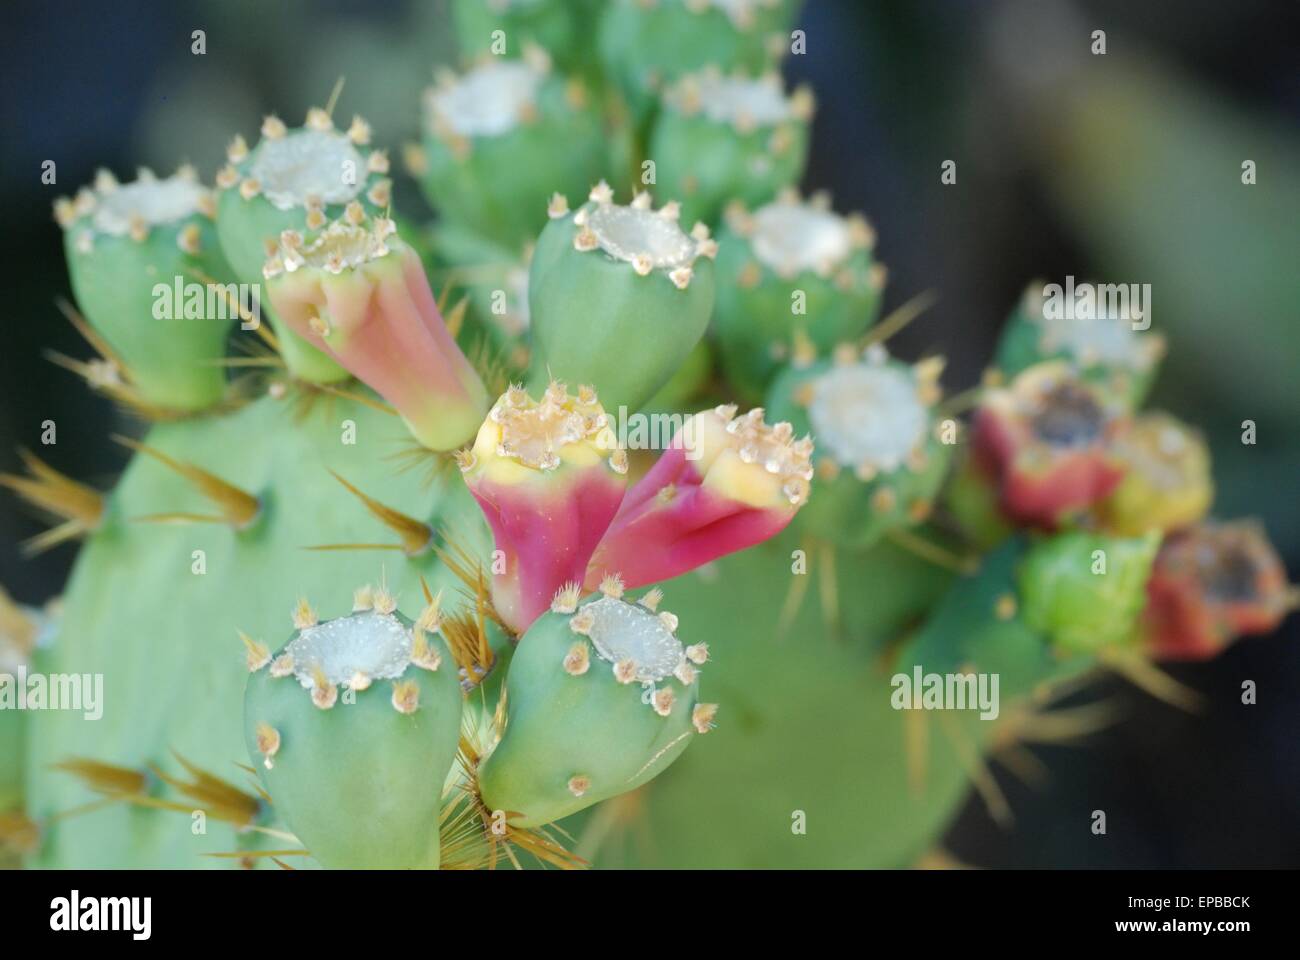 Buds flowering on a succulent cactus plant. Stock Photo